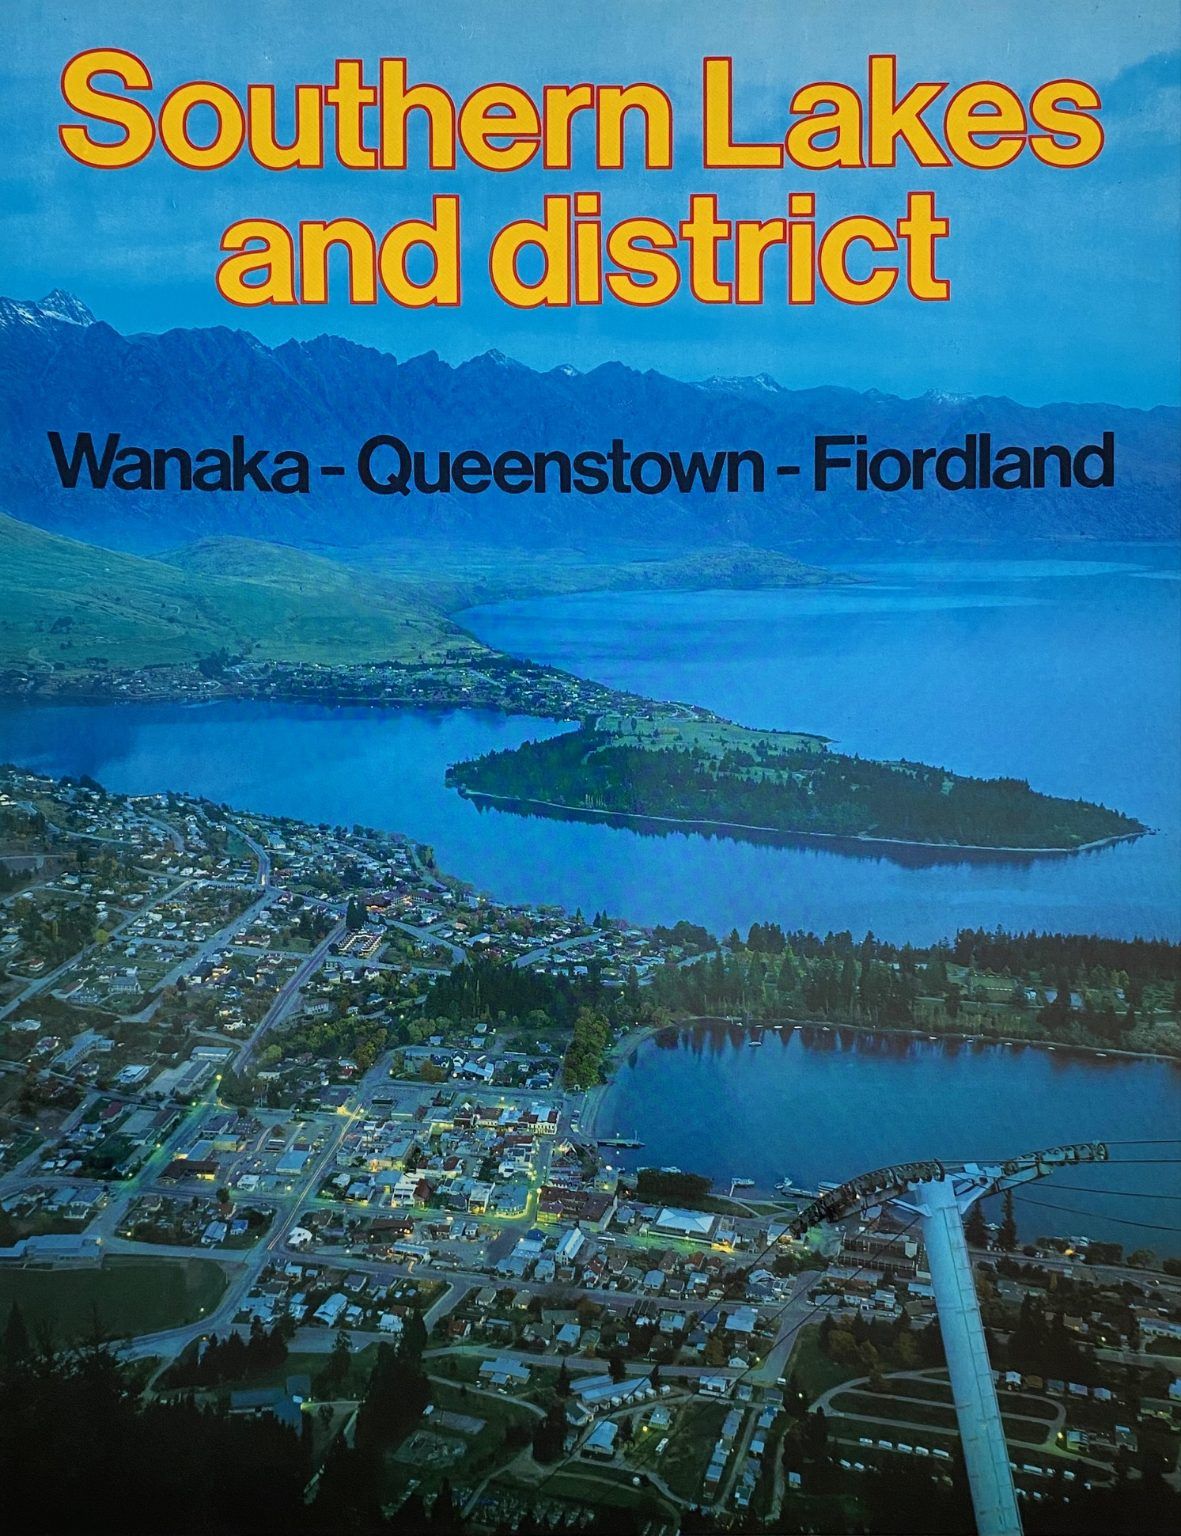 SOUTHERN LAKES AND DISTRICT: Wanaka - Queenstown - Fiordland